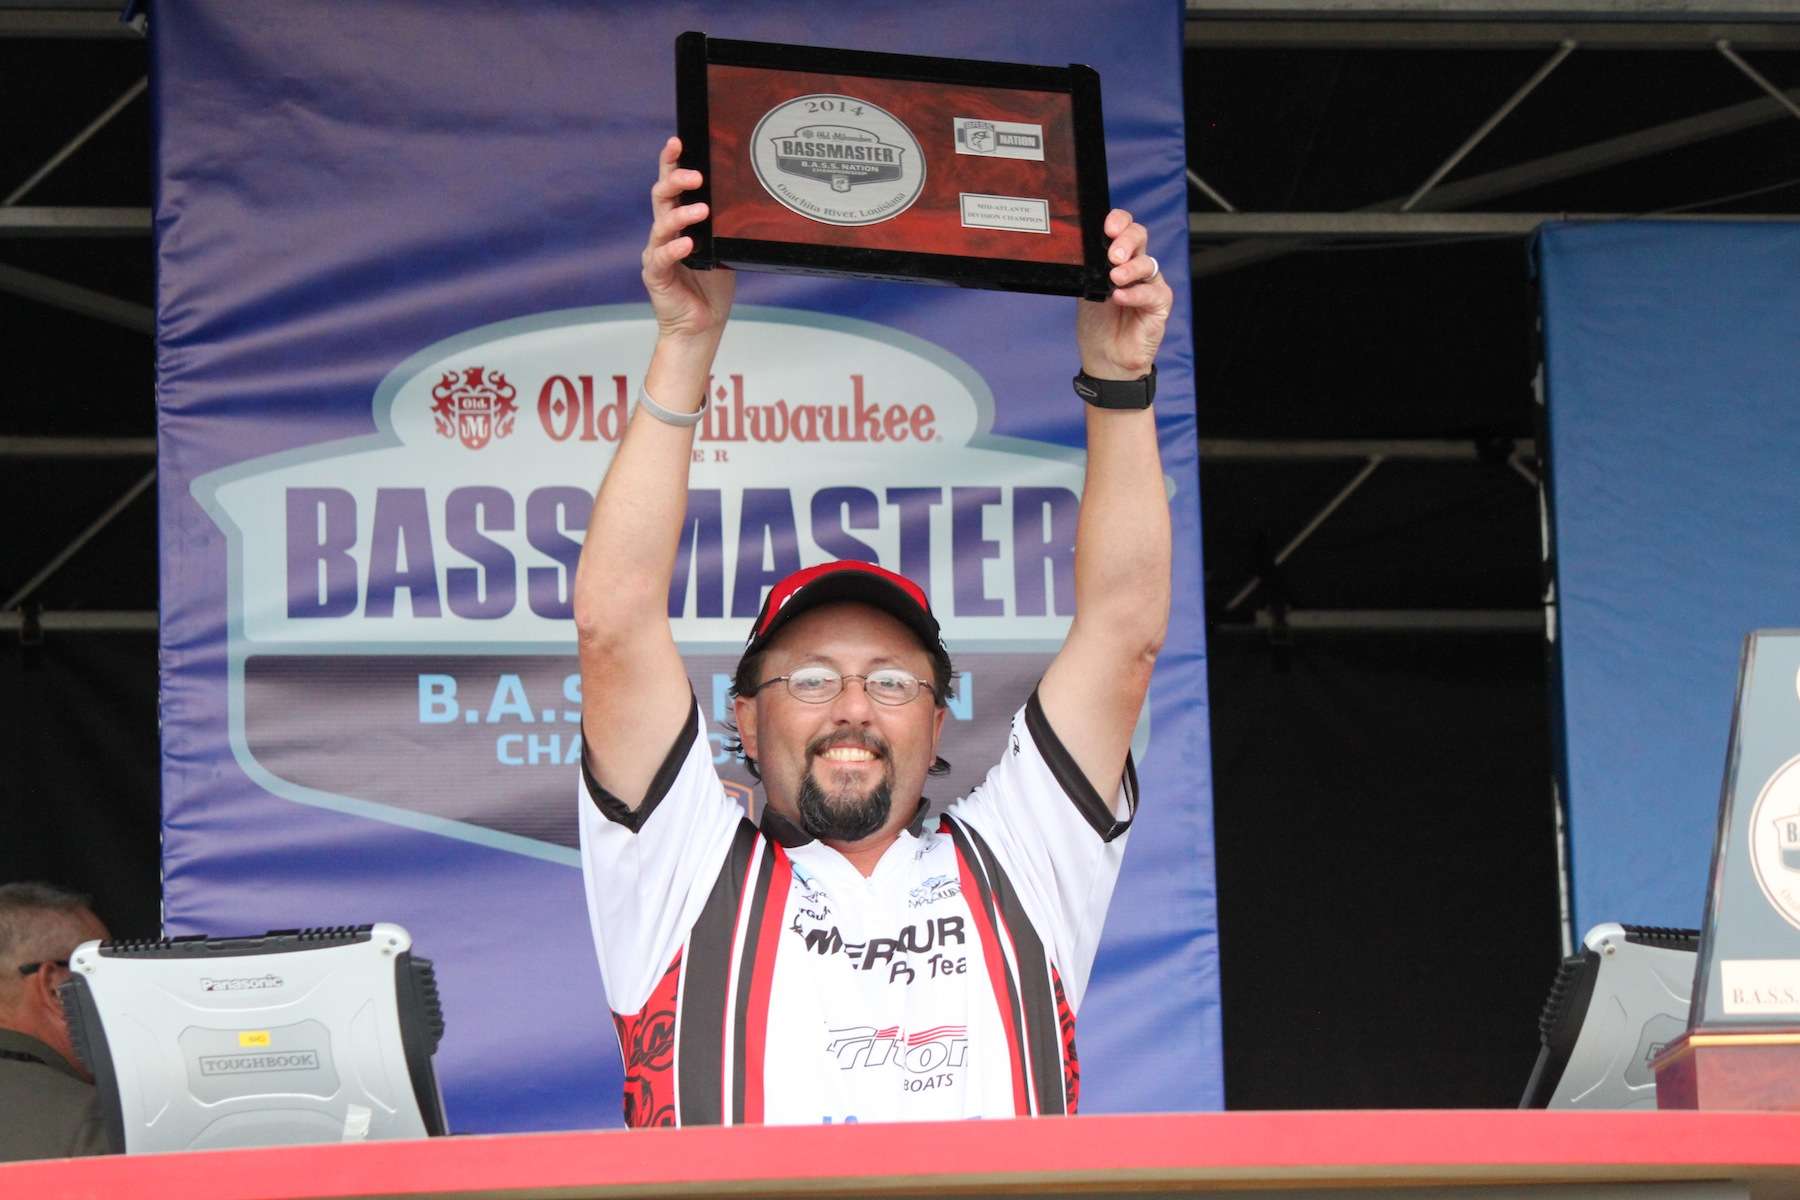 Jeff Lugar heads back to the Bassmaster Classic to represent the Mid-Atlantic. 